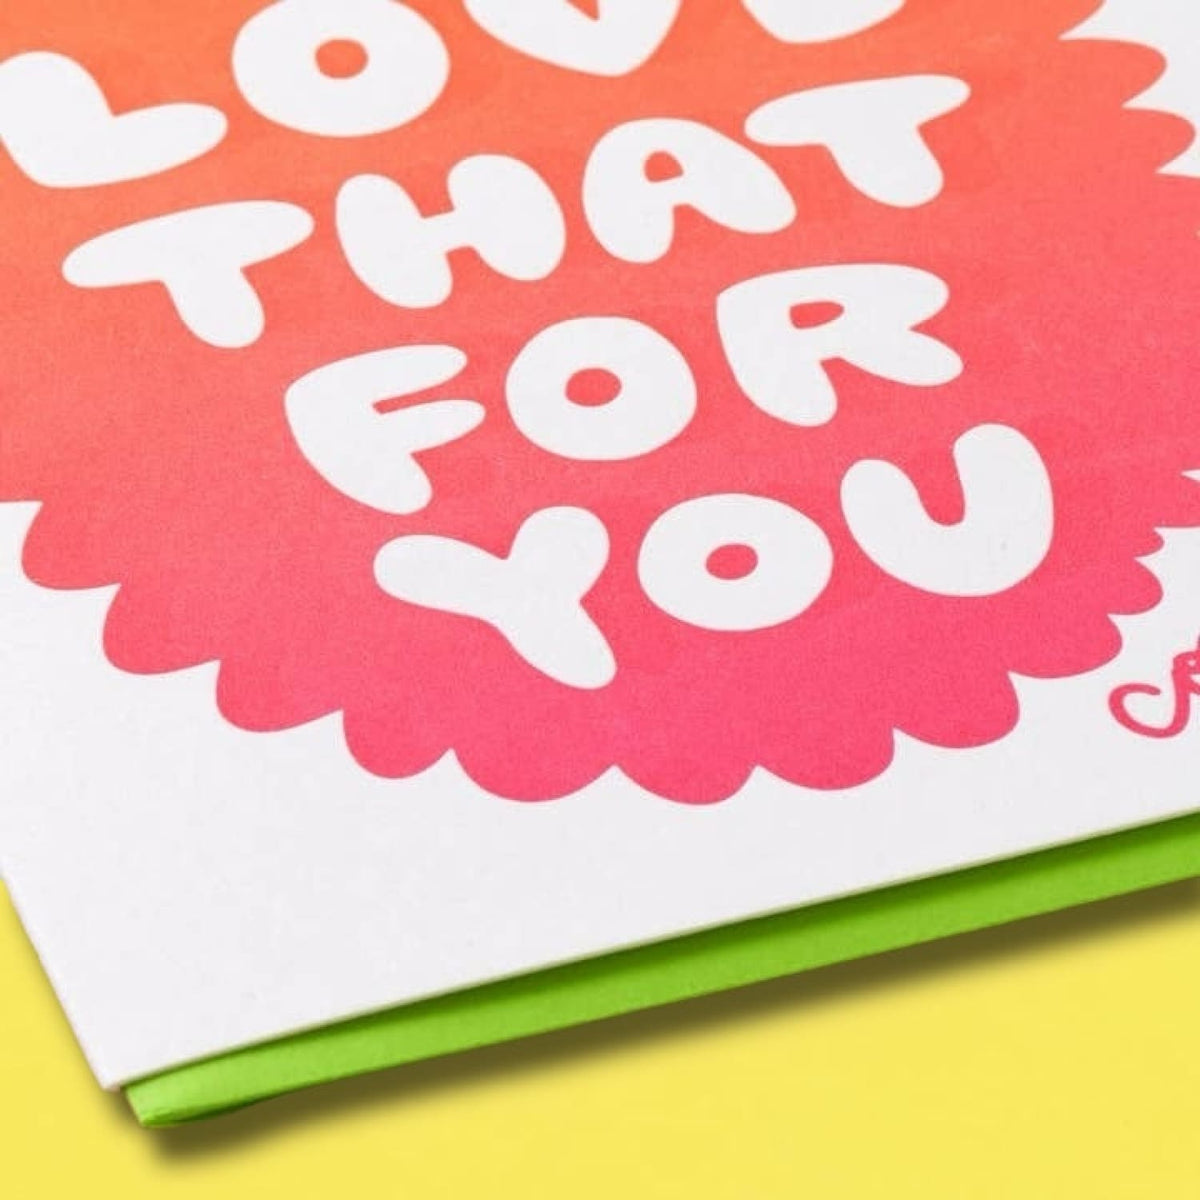 Love That For You Congrats Greetings Card A2 - Blank